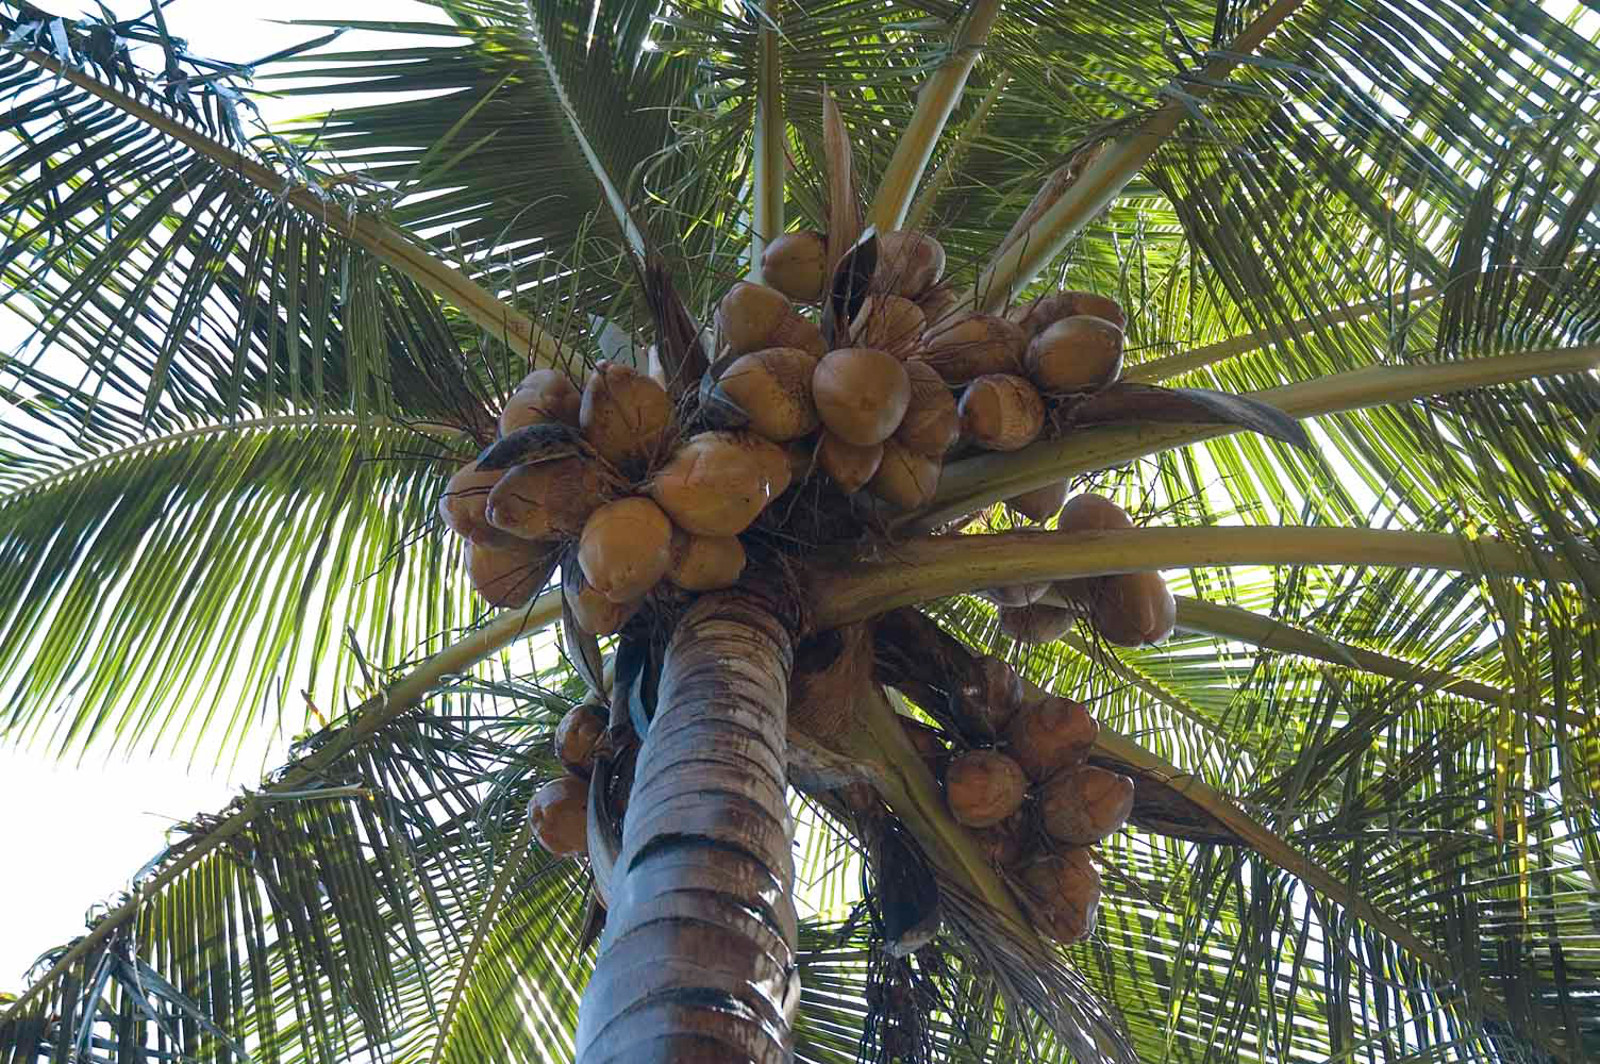 Is Your Obsession With Coconuts Harming the Environment?